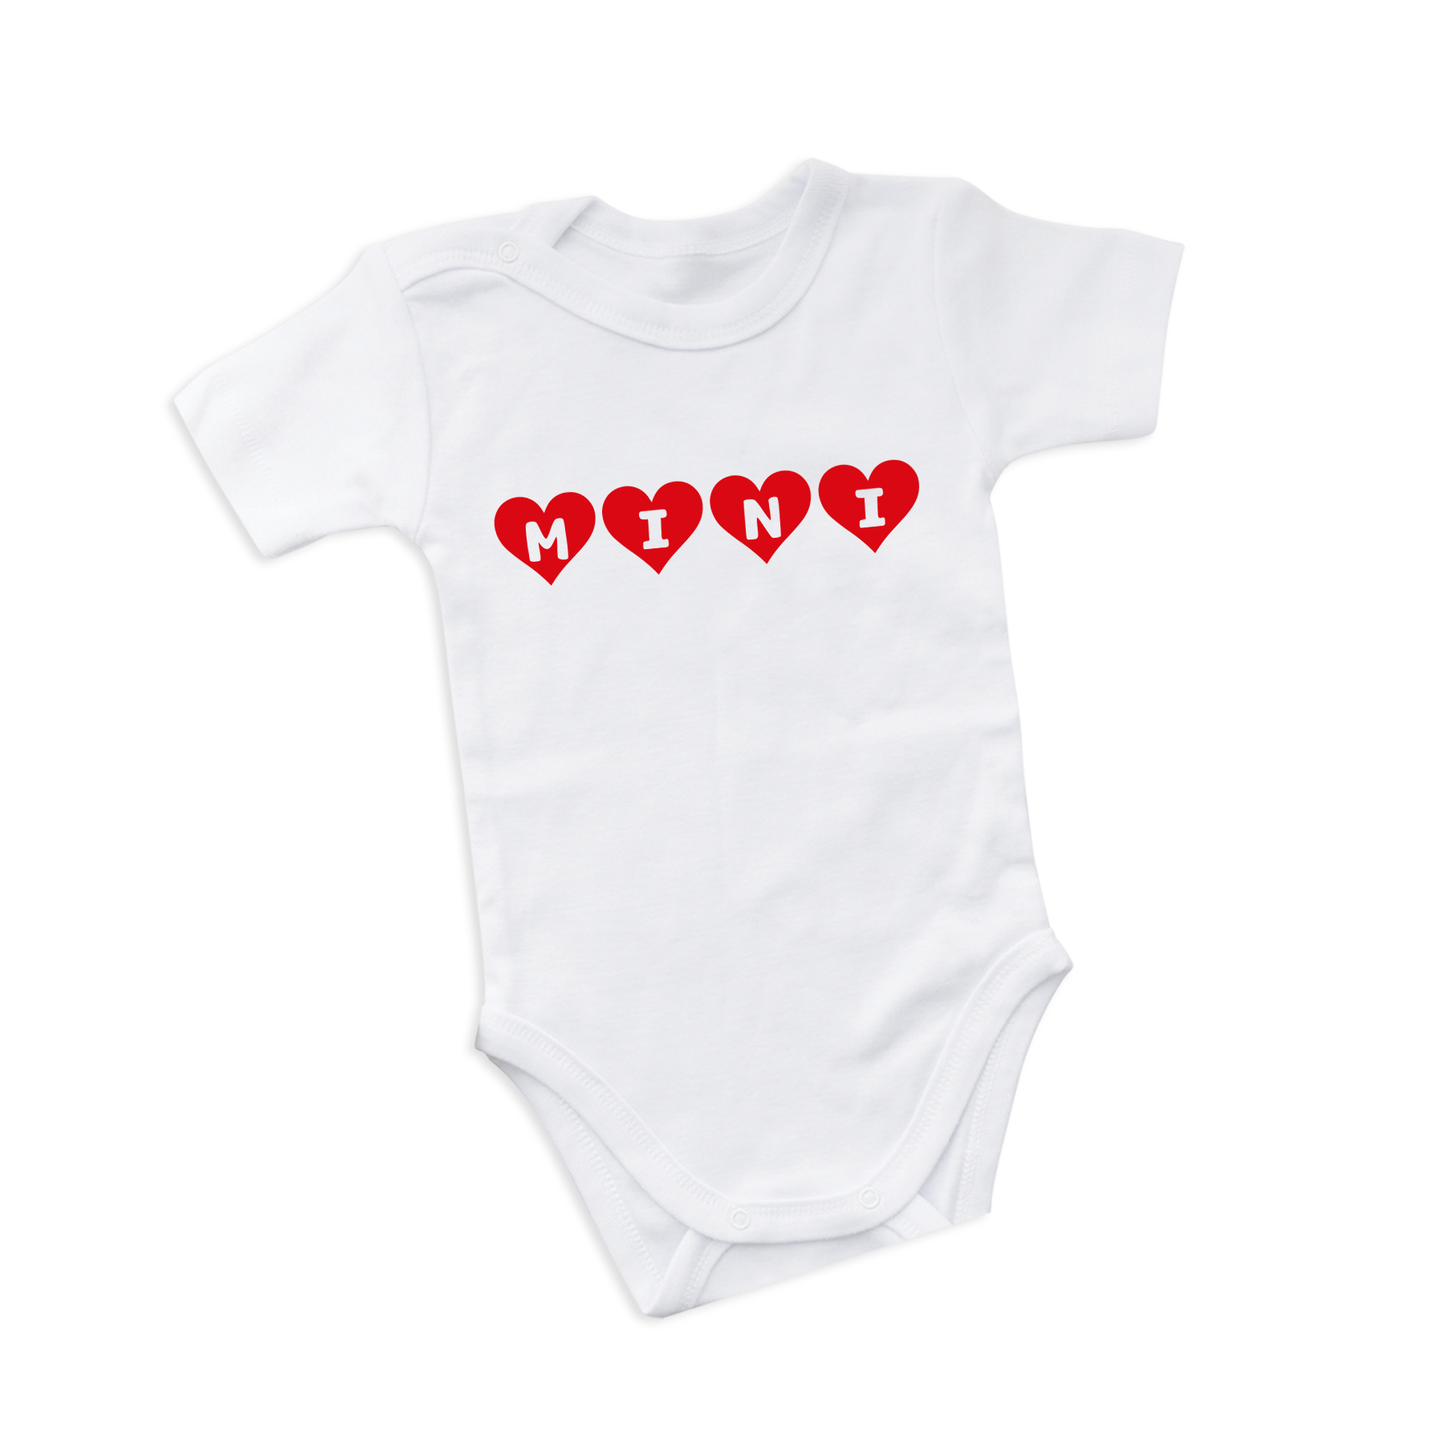 Mommy Mini with Hearts T-Shirt